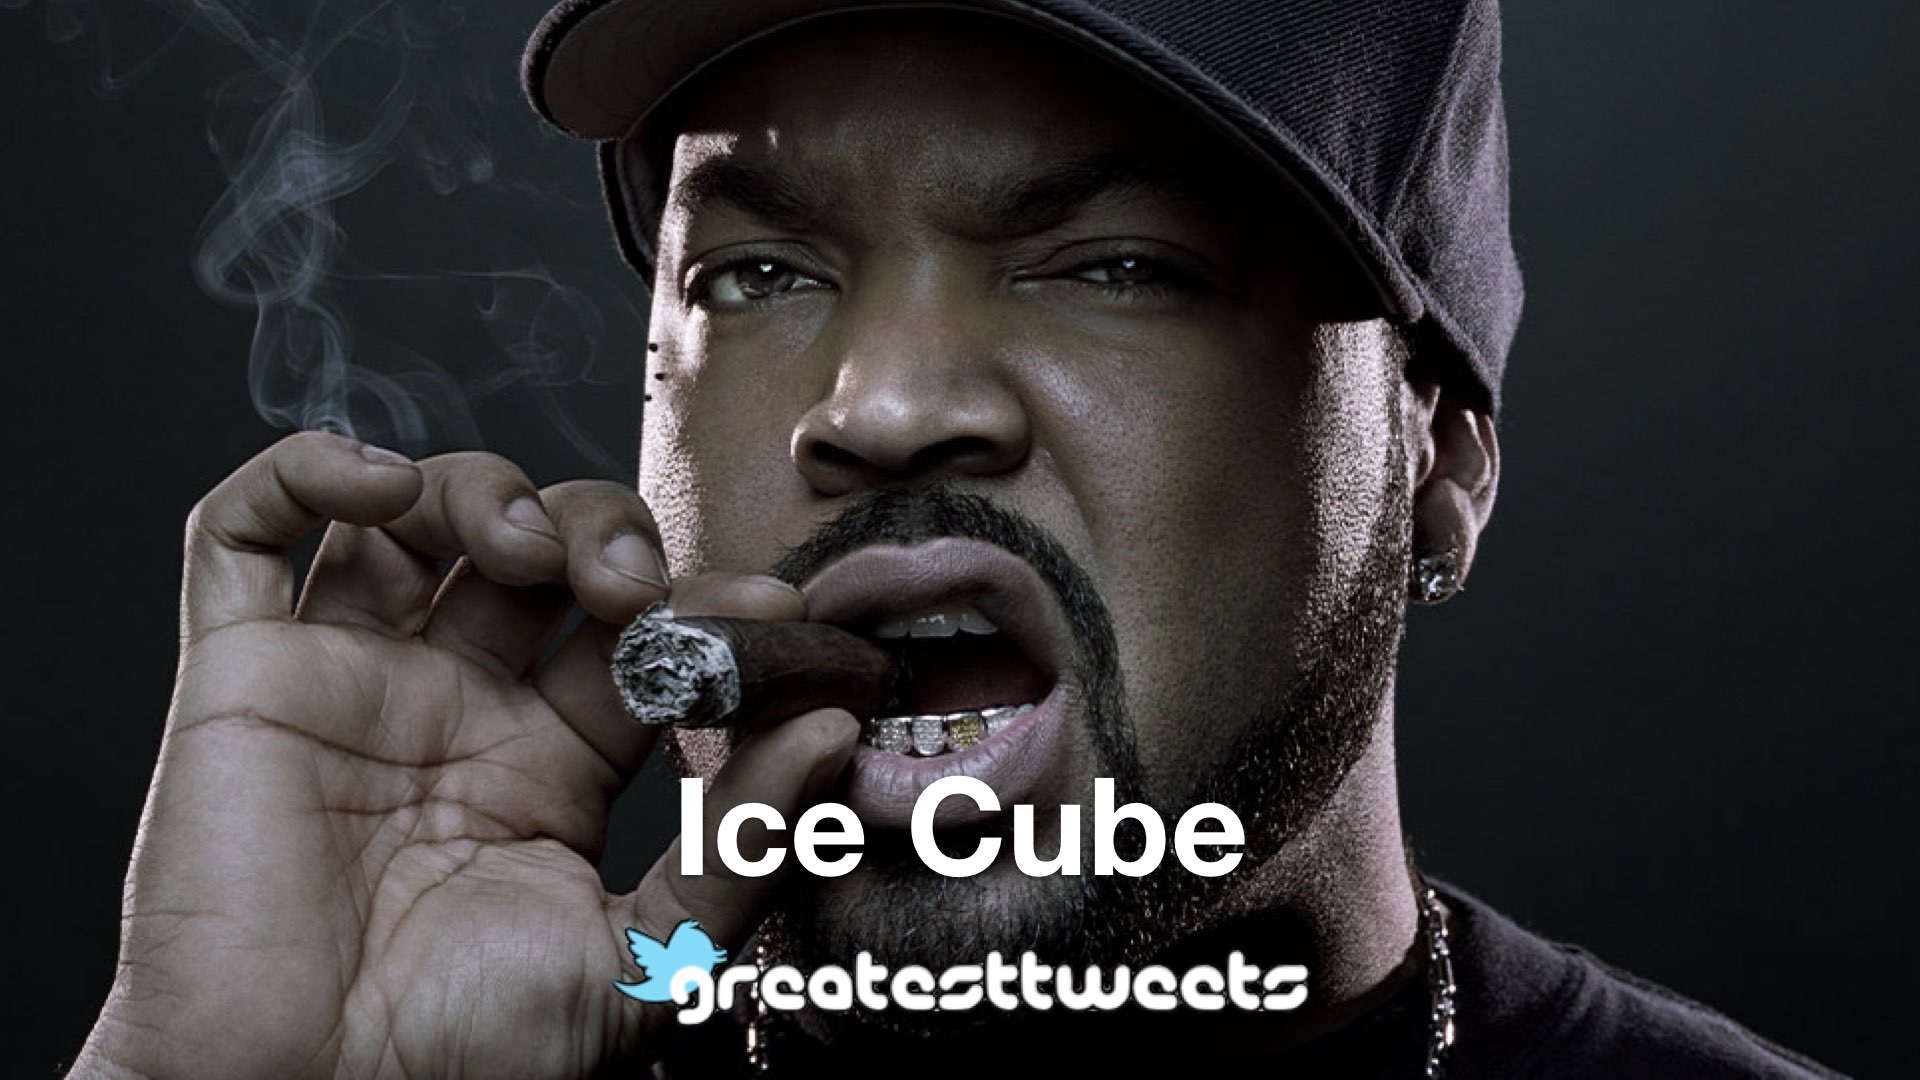 Ice cube текст. Ice Cube. Ice Cube Biography. Дом Ice Cube. Ice Cube и Dr Dre.